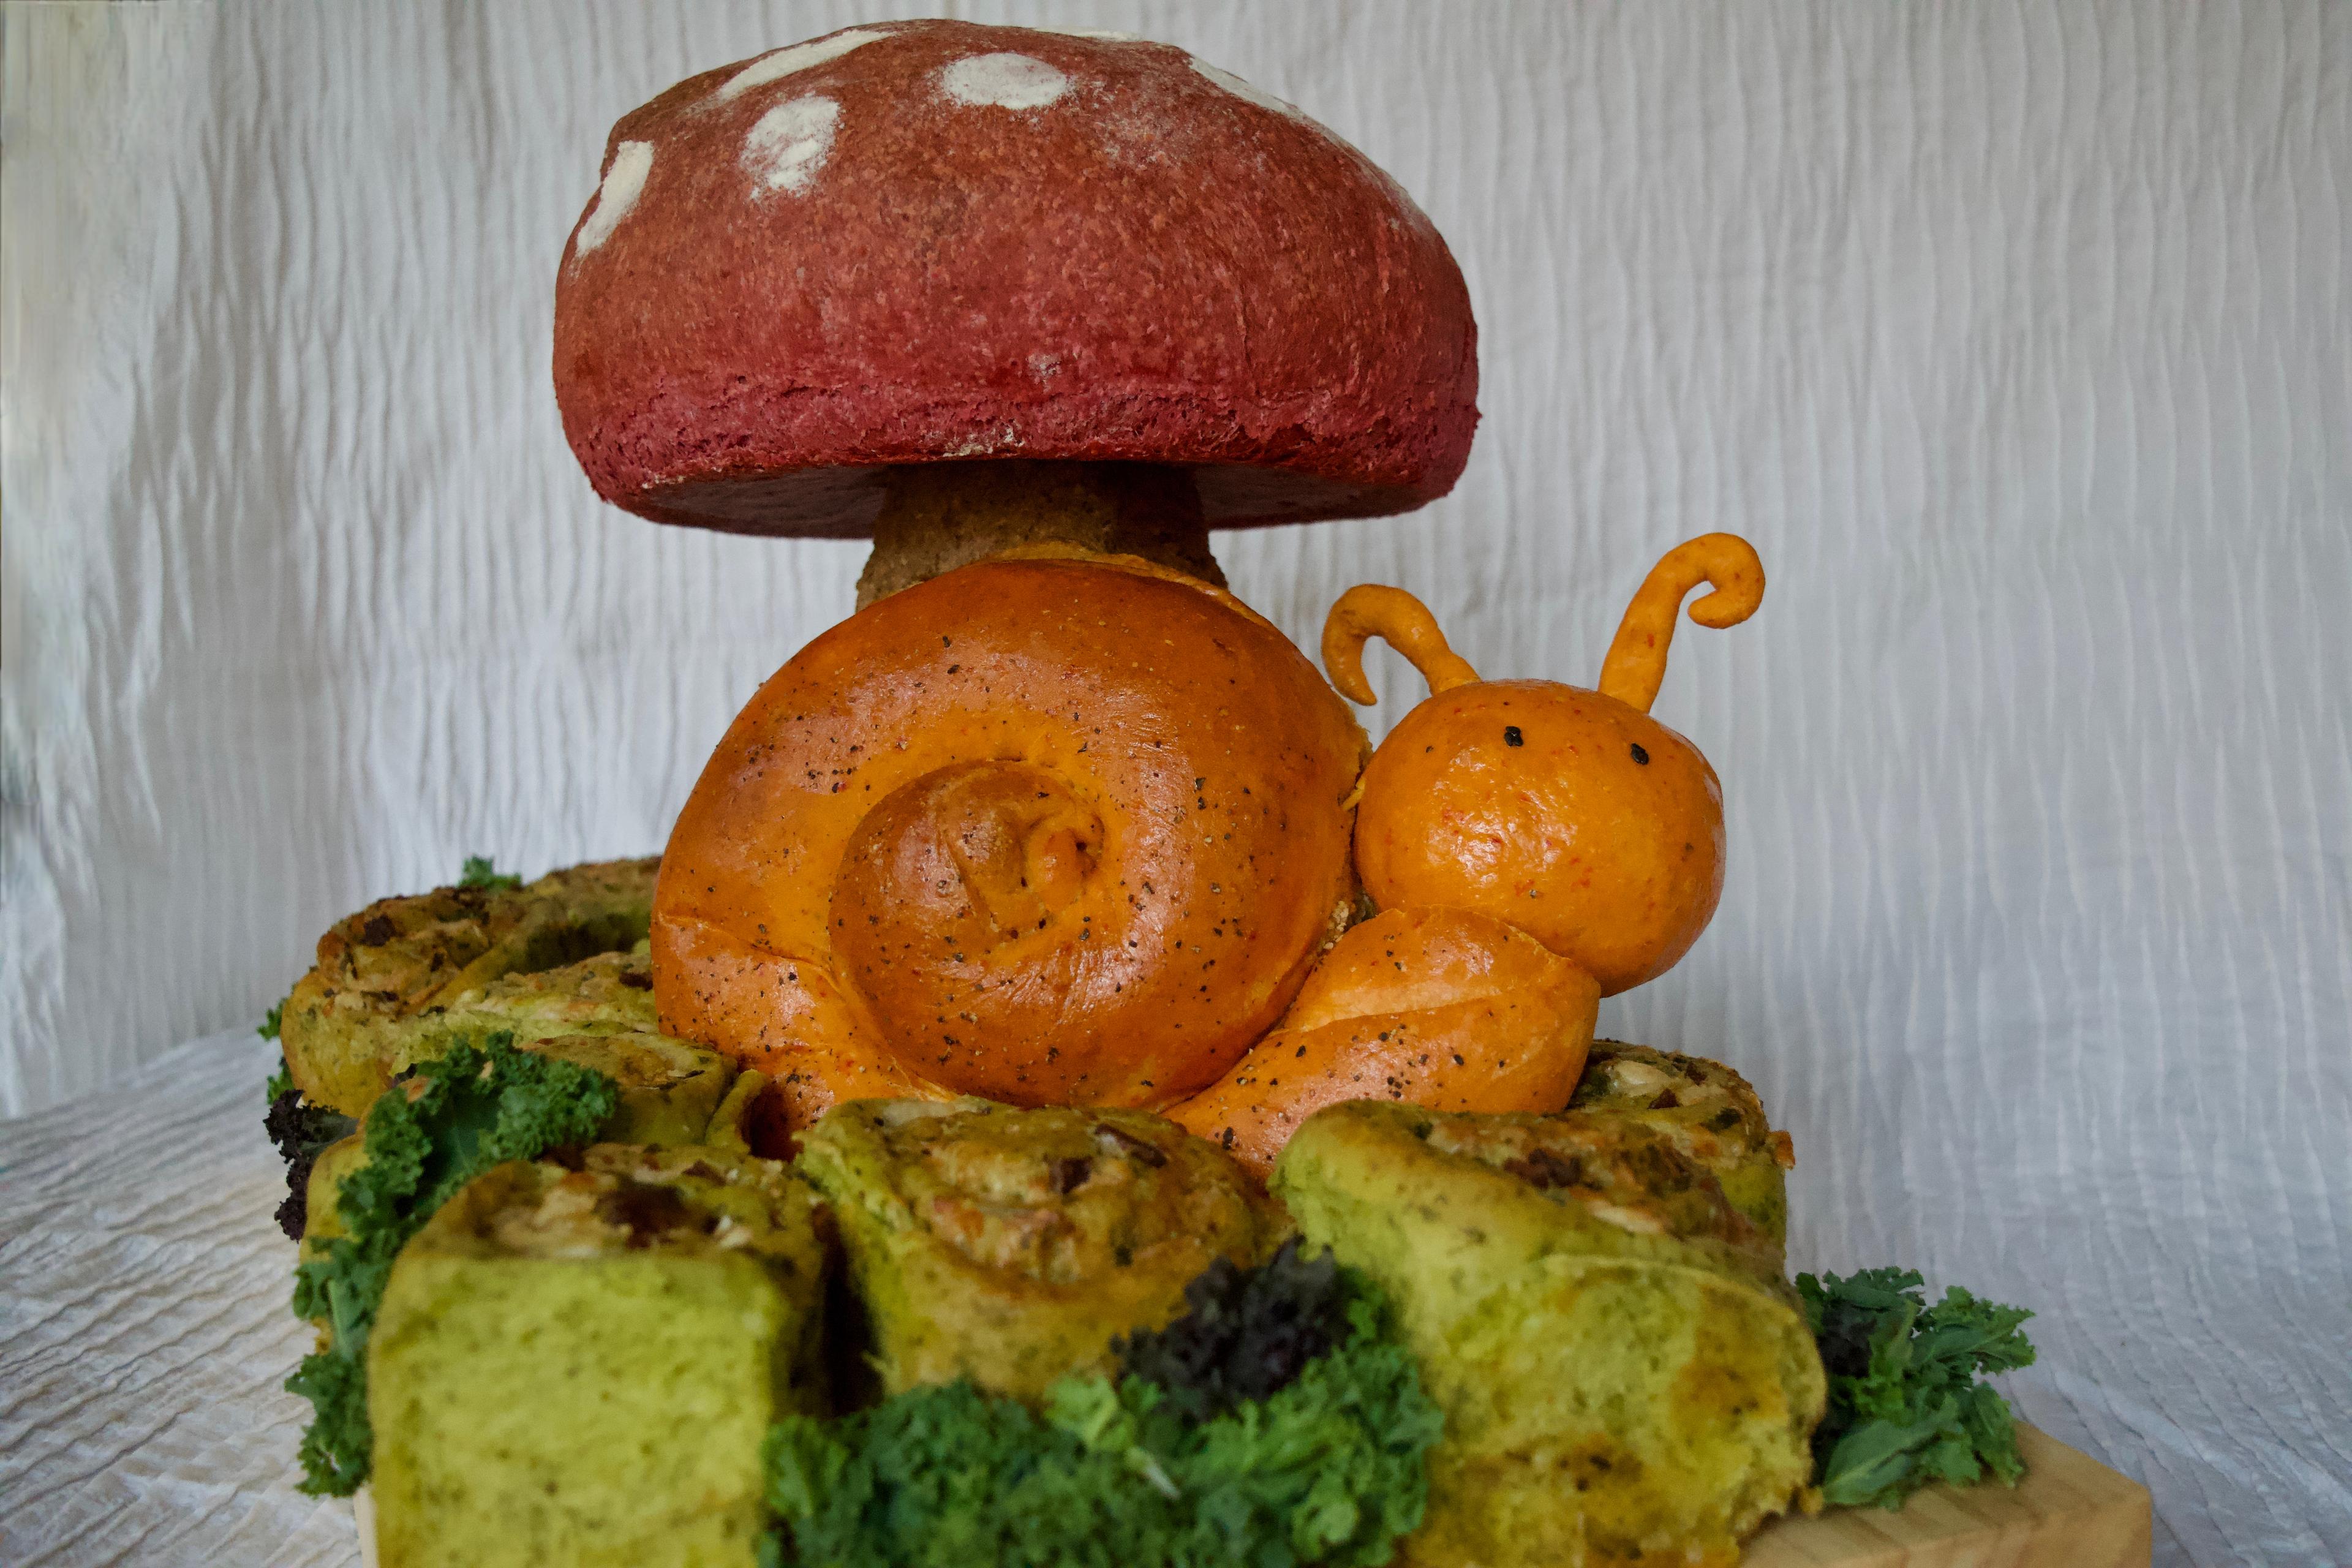 Completed bread sculpture looking at the snail head on